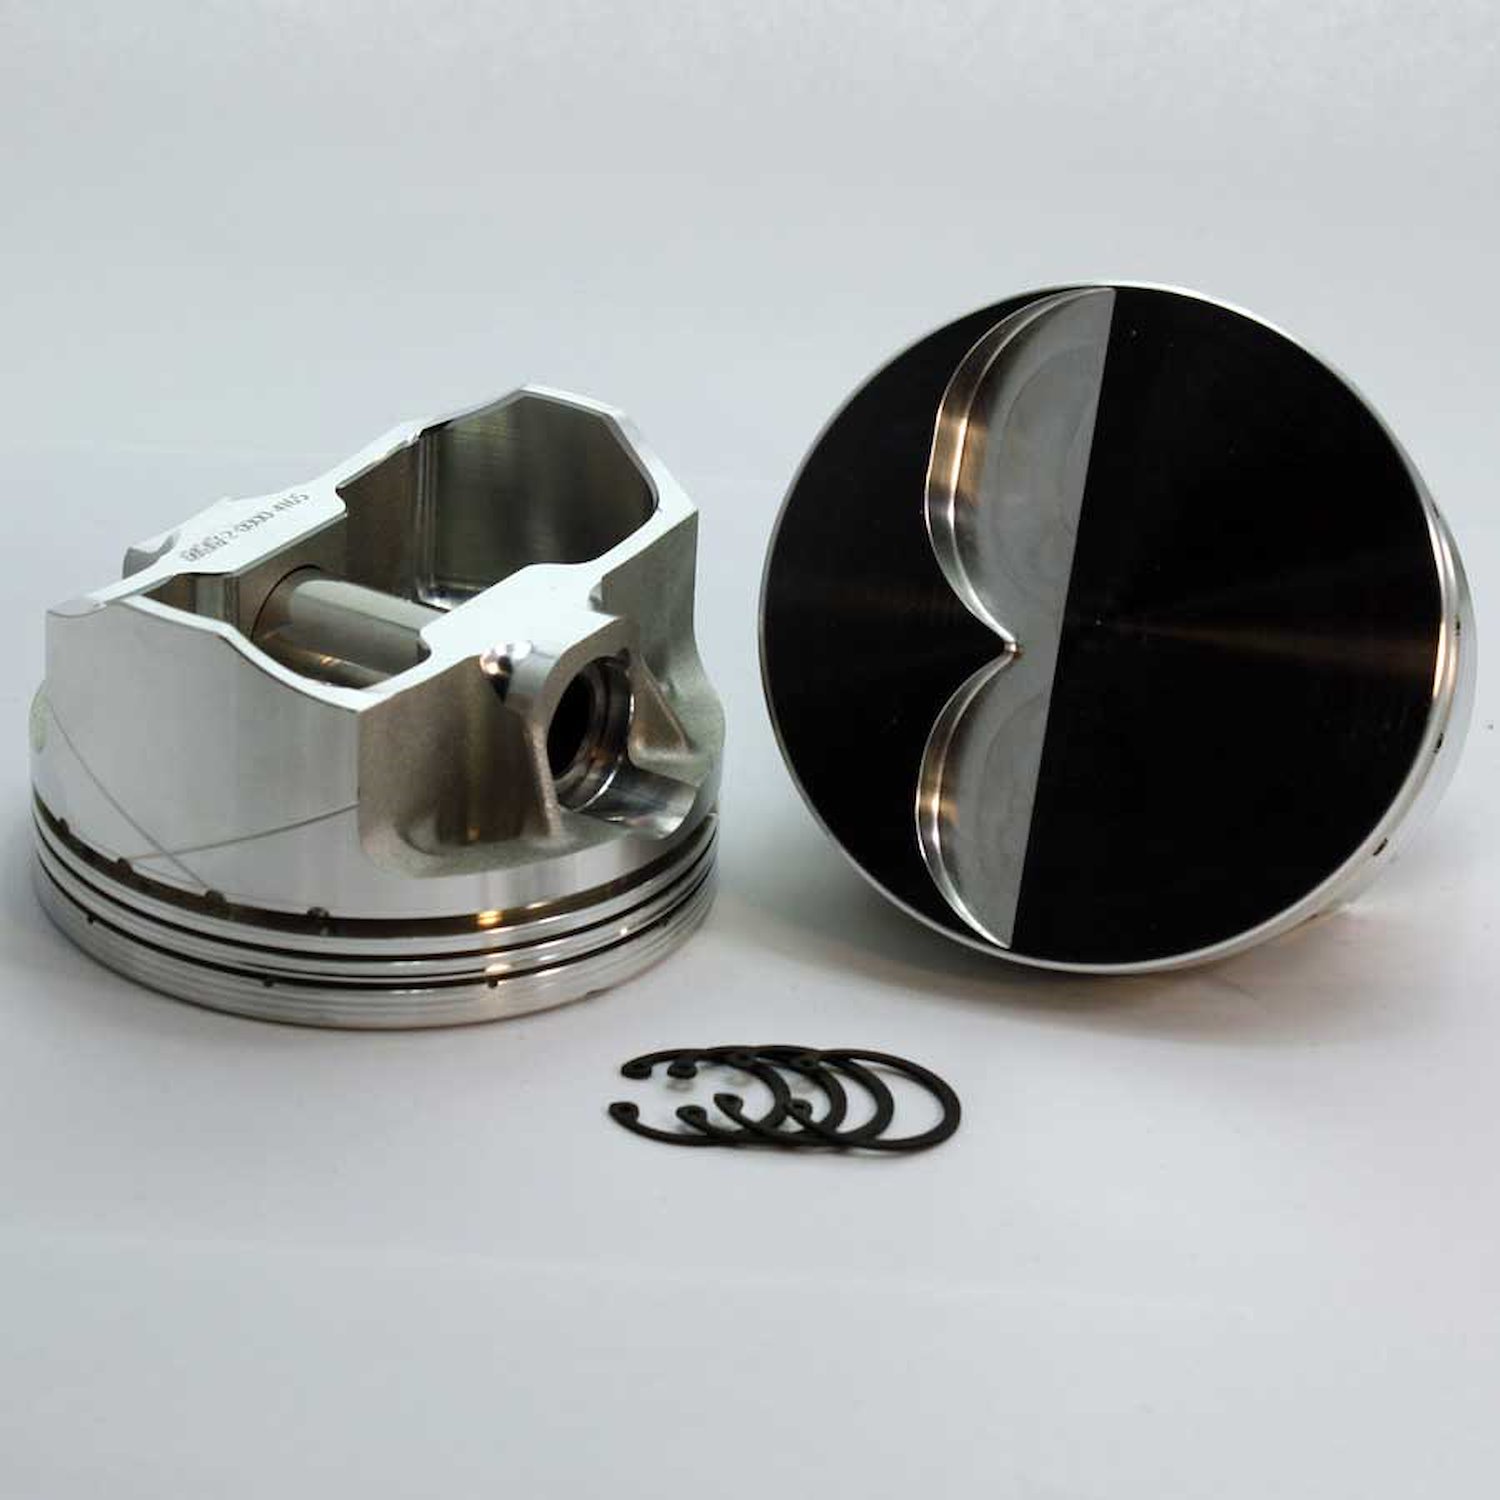 3-3400-4060 FX-Series Flat Top Piston Set for 1962-2001 Small Block Ford 289-302, 4.060 in. Bore, -4cc Volume [OEM Stroke]